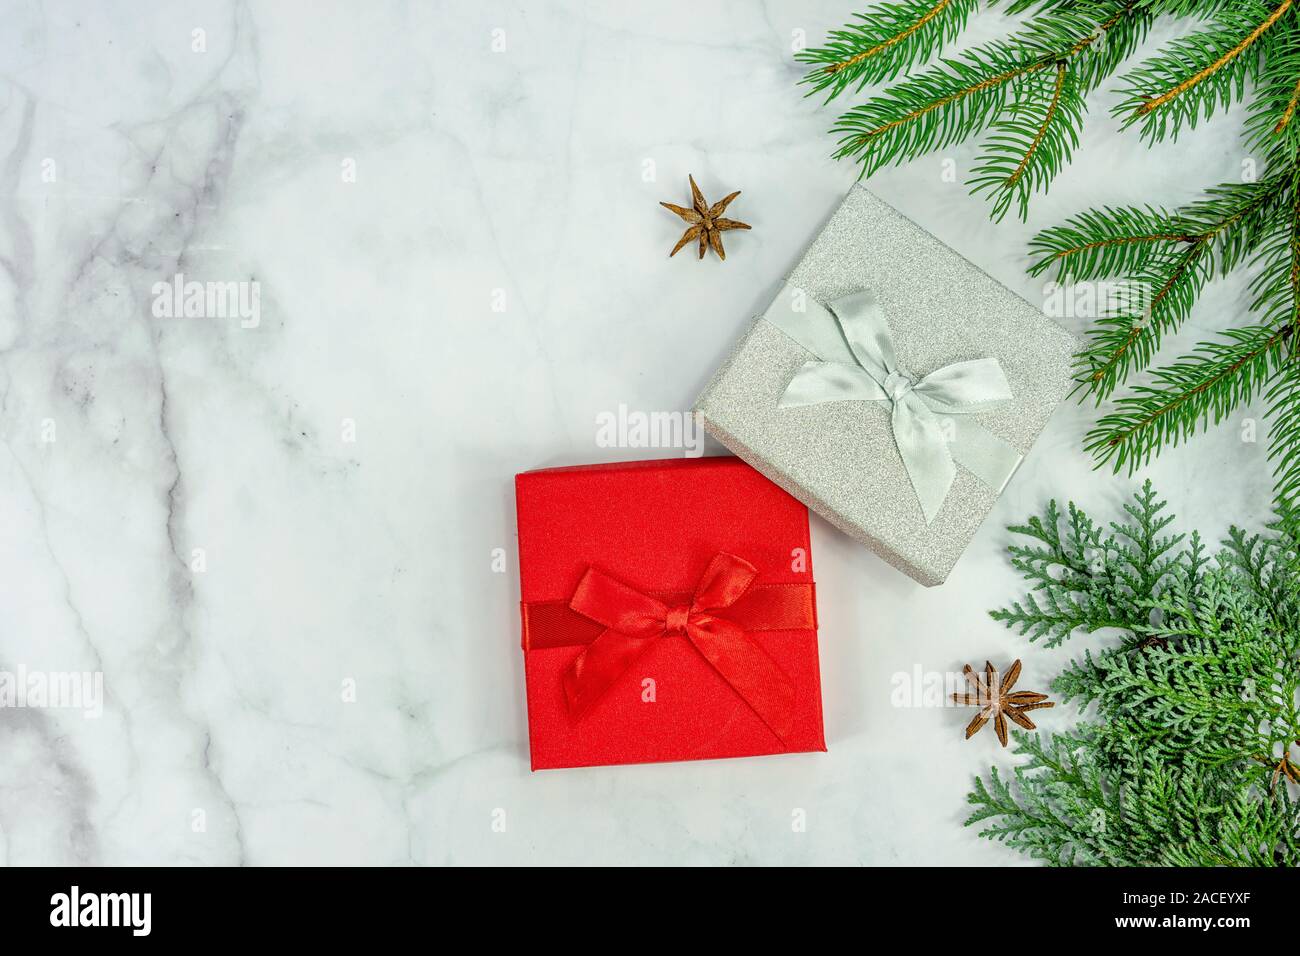 Christmas frame background on marbel with silver and red gift box . Stock Photo